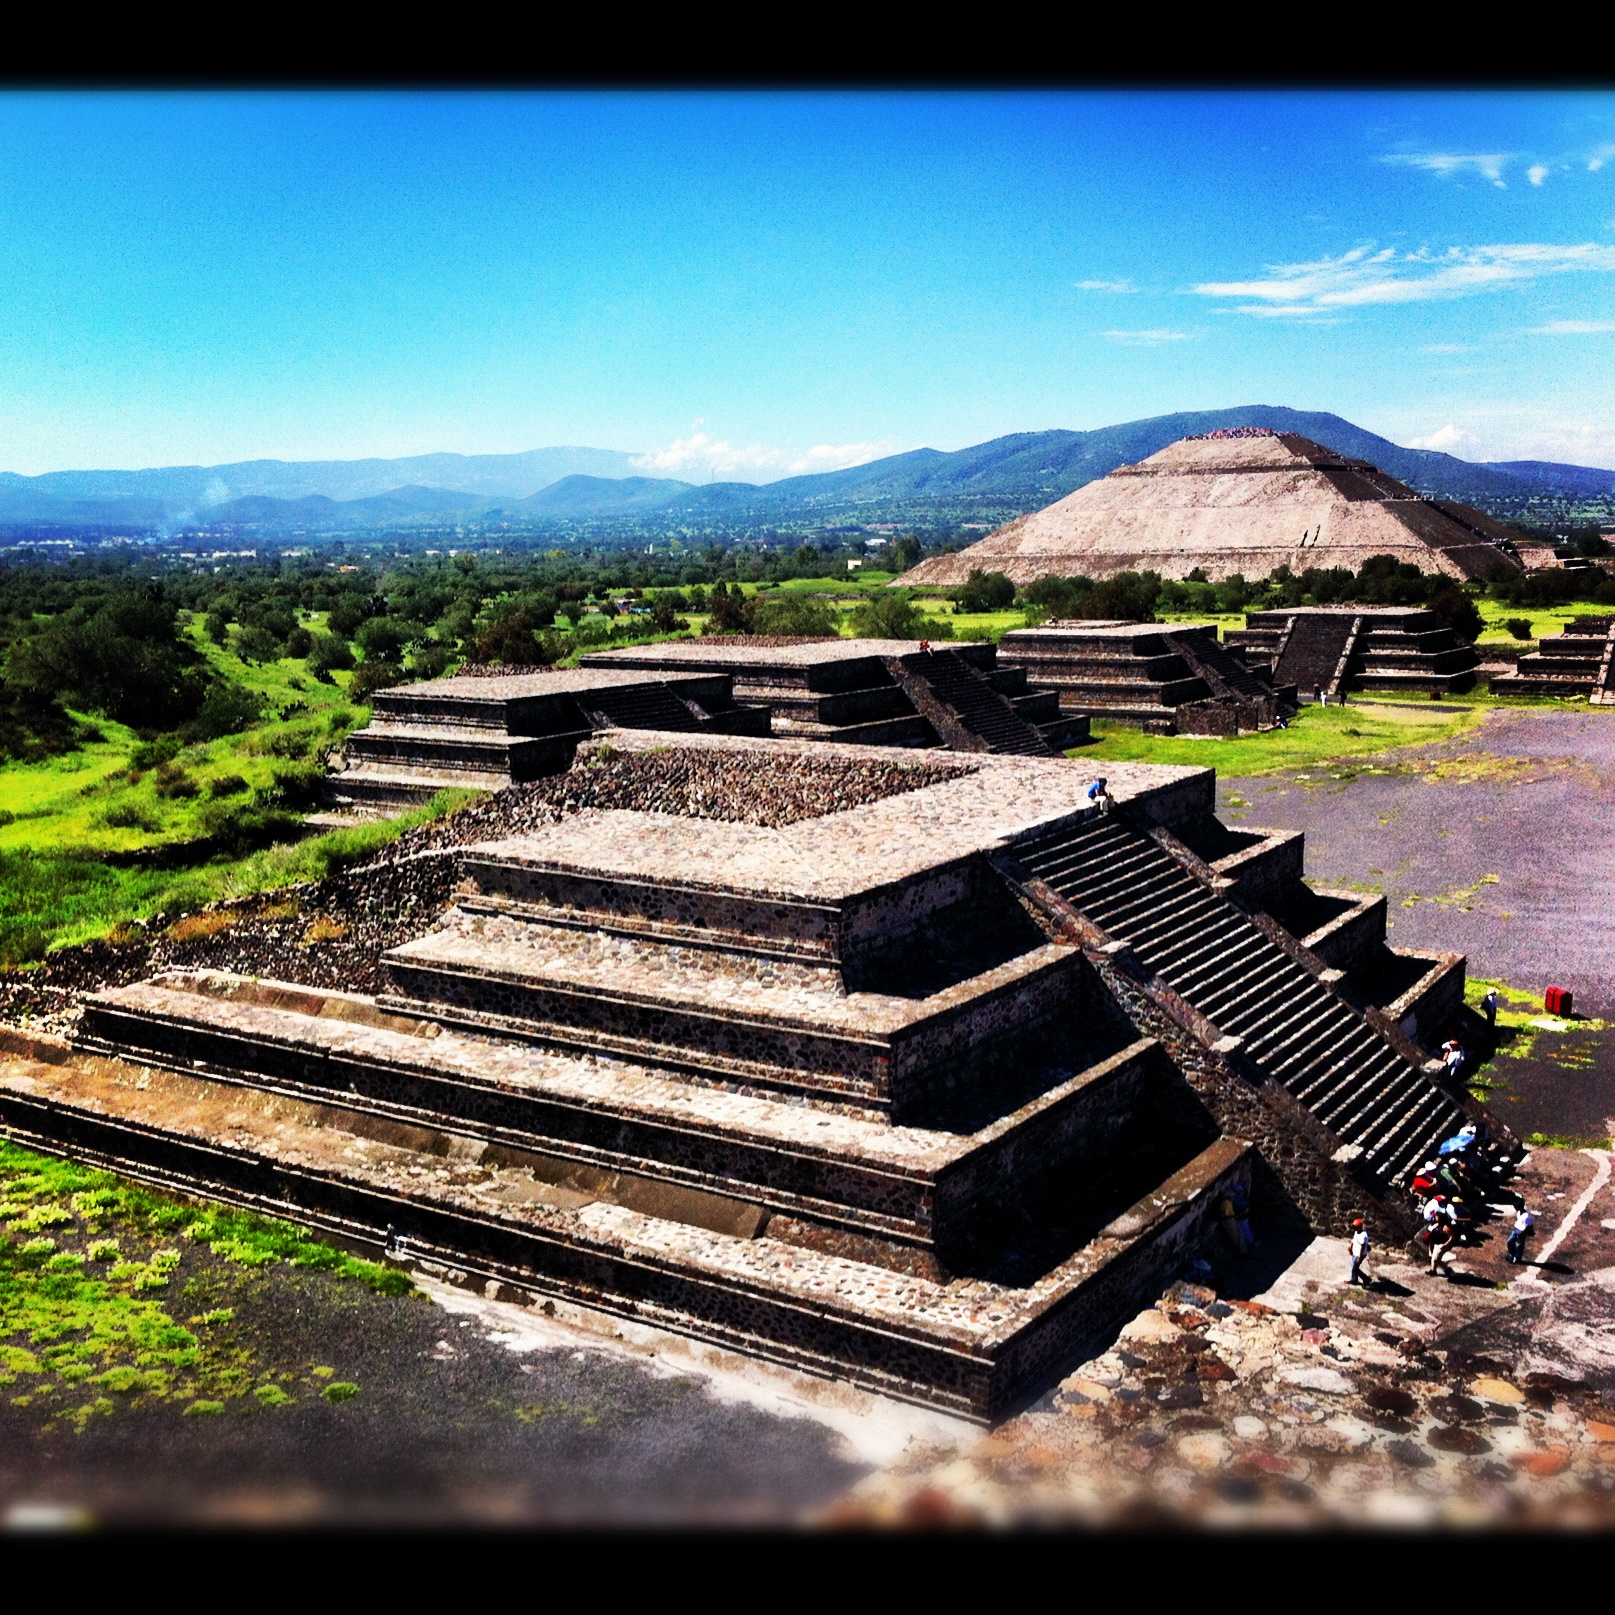 Sun pyramid alongside Valley of the Dead in Teotihuacán.  Photo by Patricio Athie